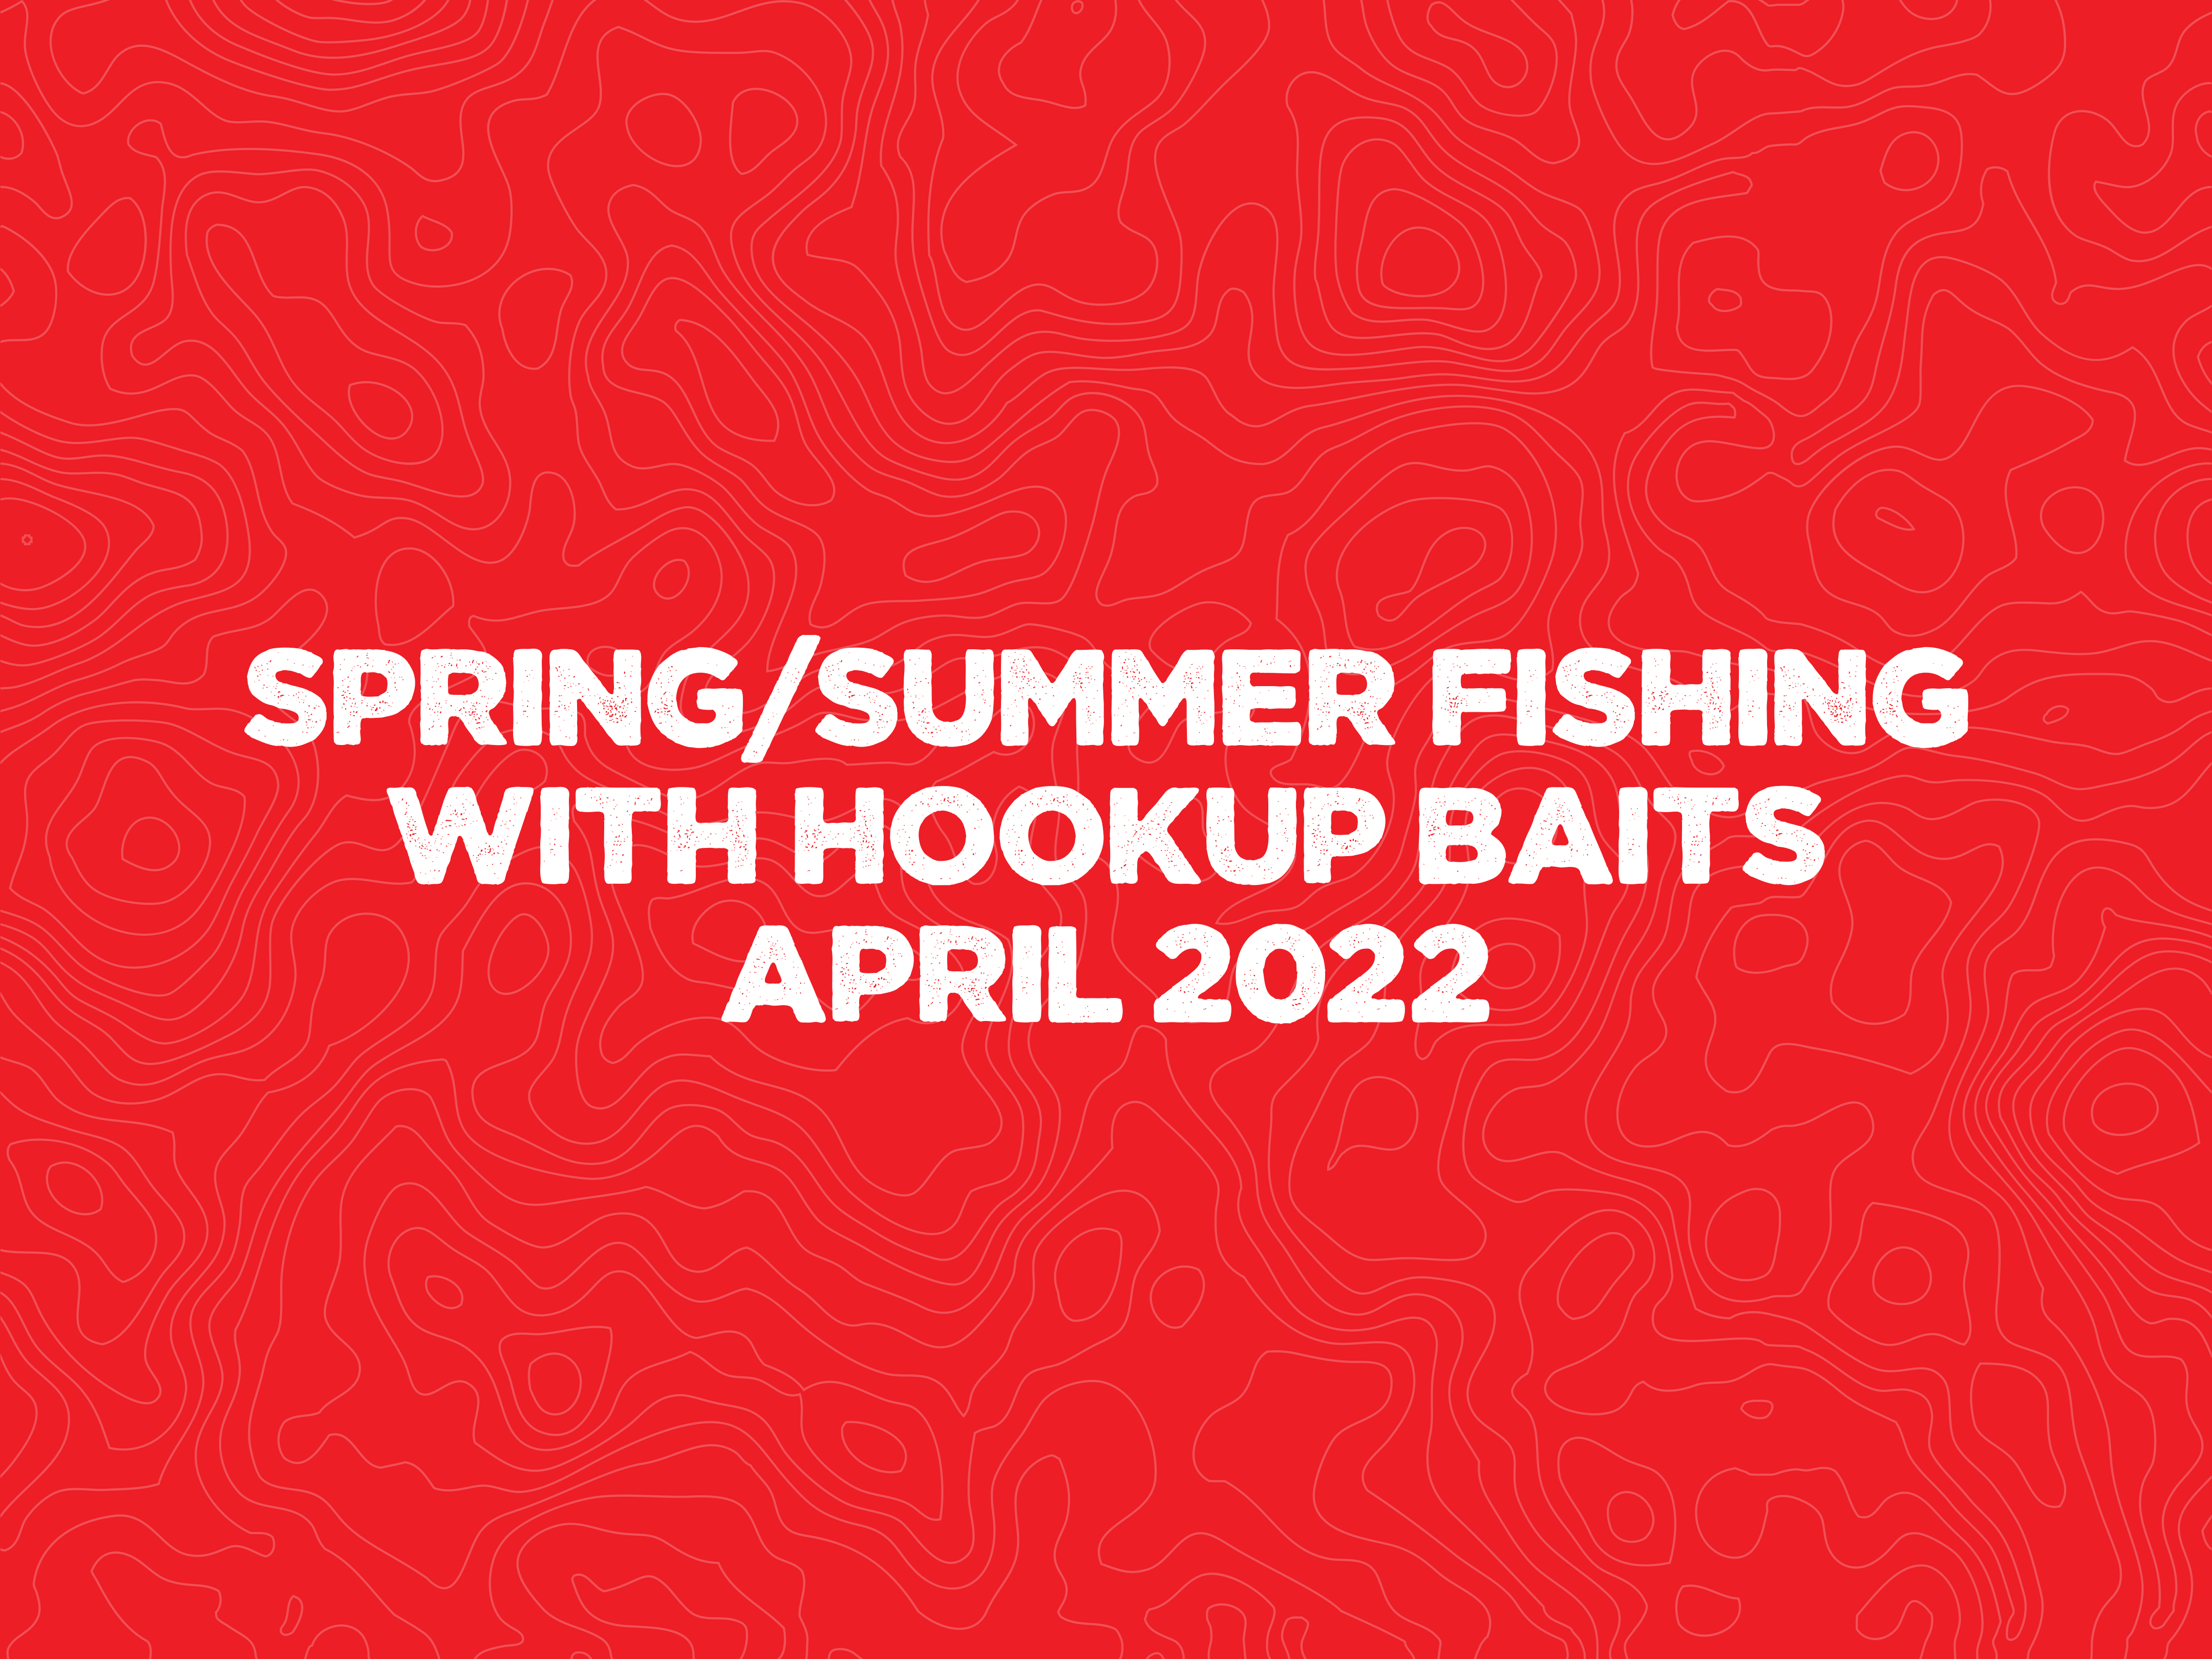 Spring/Summer Fishing with Hookup Baits April 2022